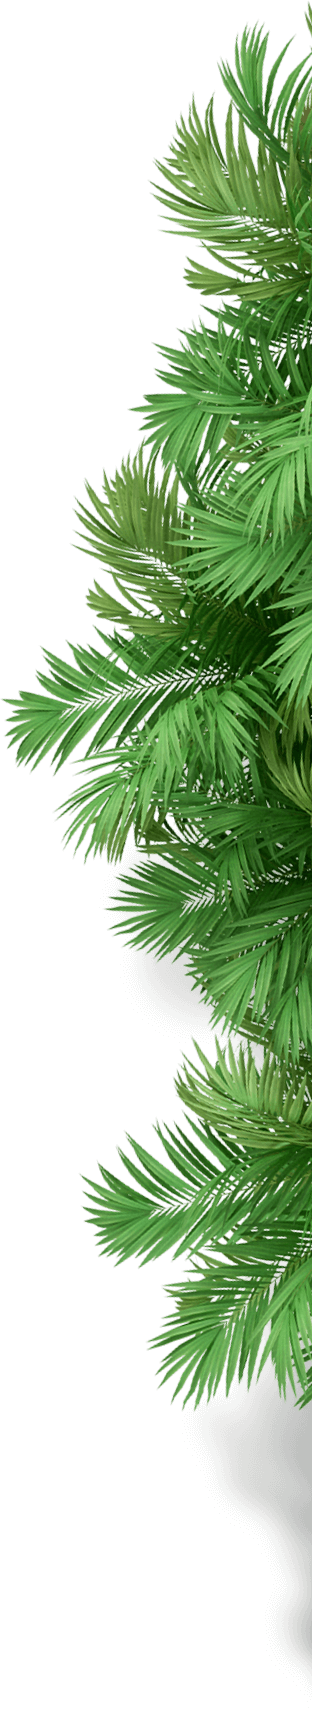 5214-palm-tree-1.png